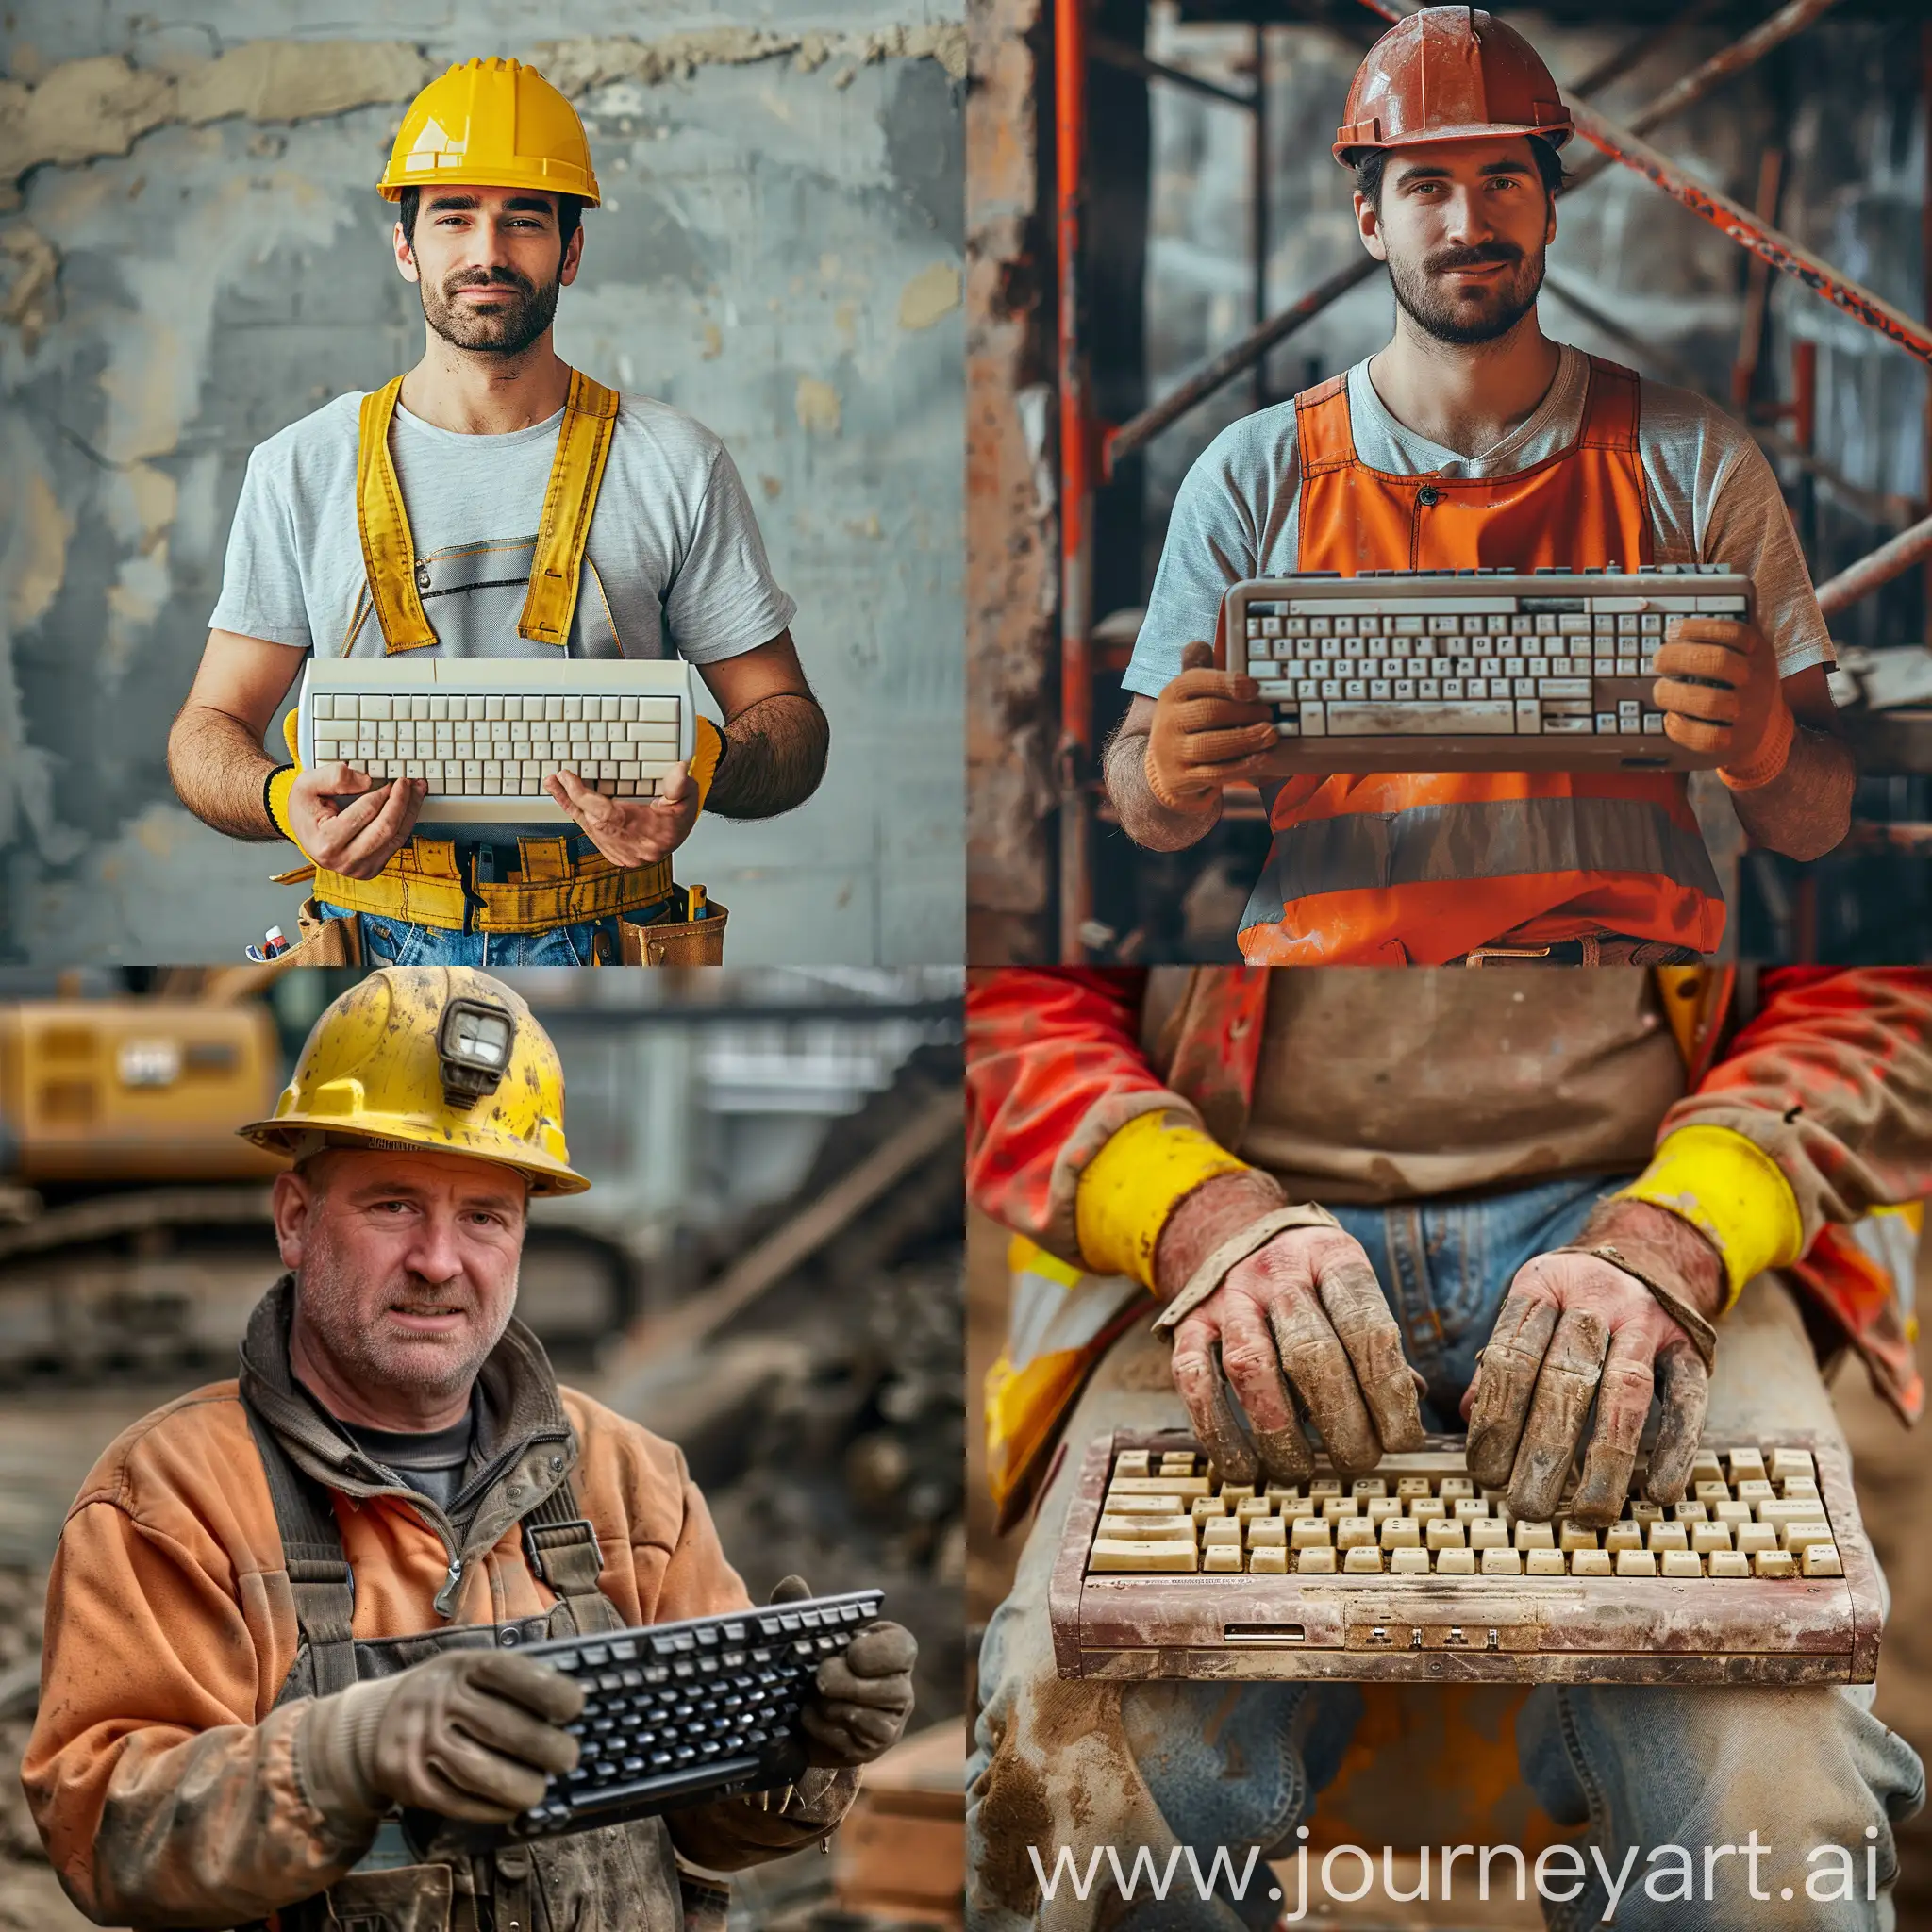 TechSavvy-Construction-Worker-with-Keyboard-Innovative-Work-Concept